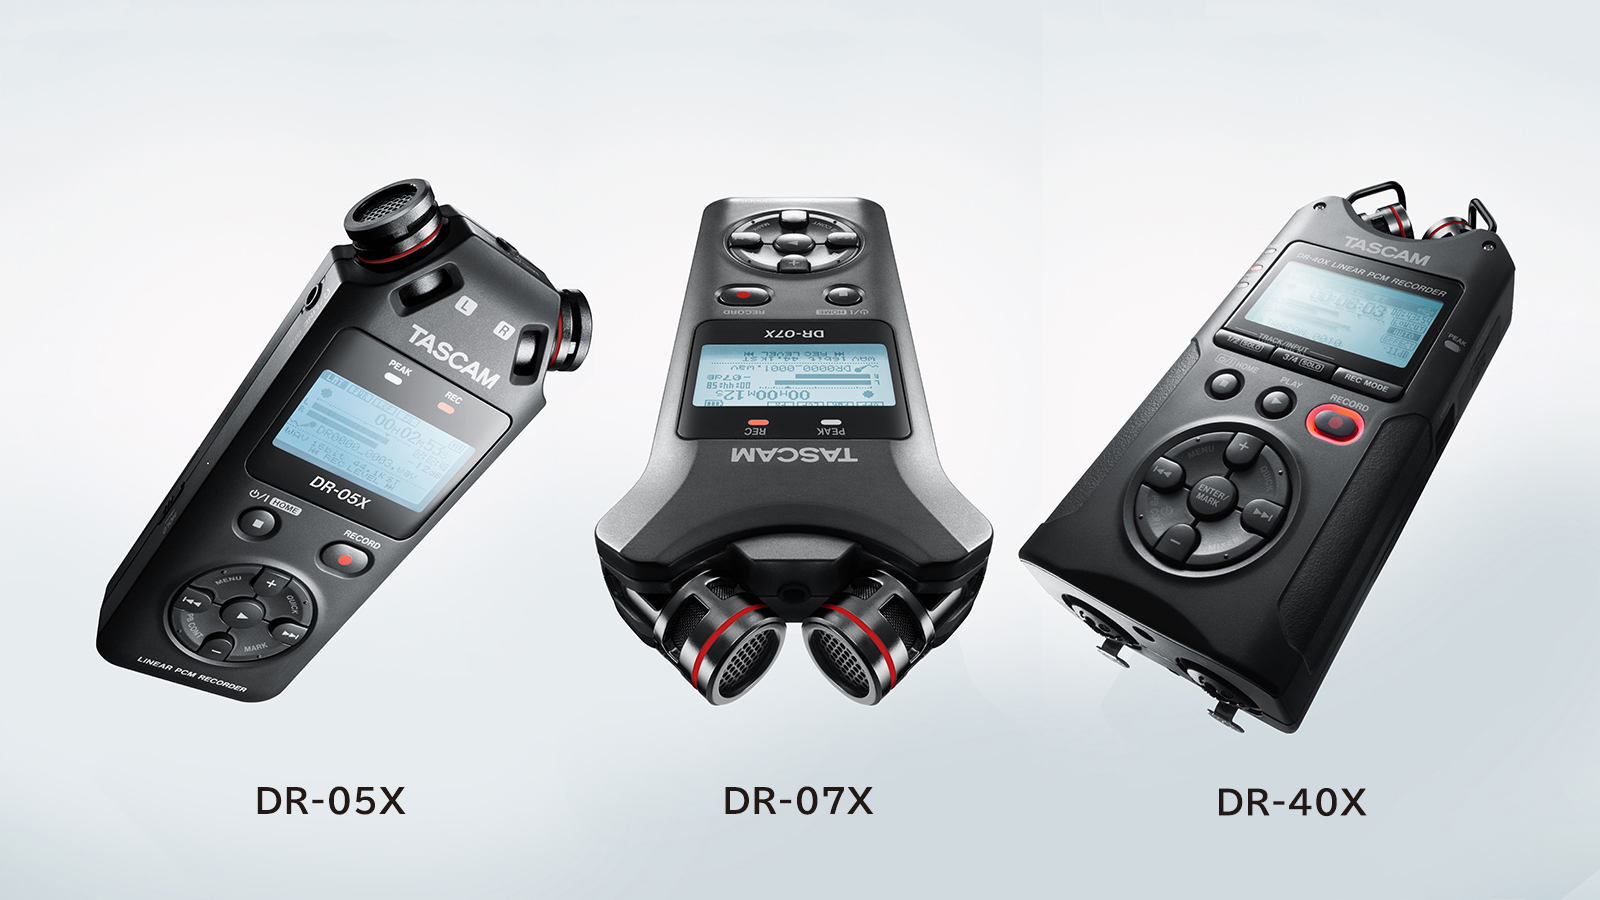 TASCAM Introduces Next Generation DR-X Series, Digital Audio Recorder and USB Audio Interface